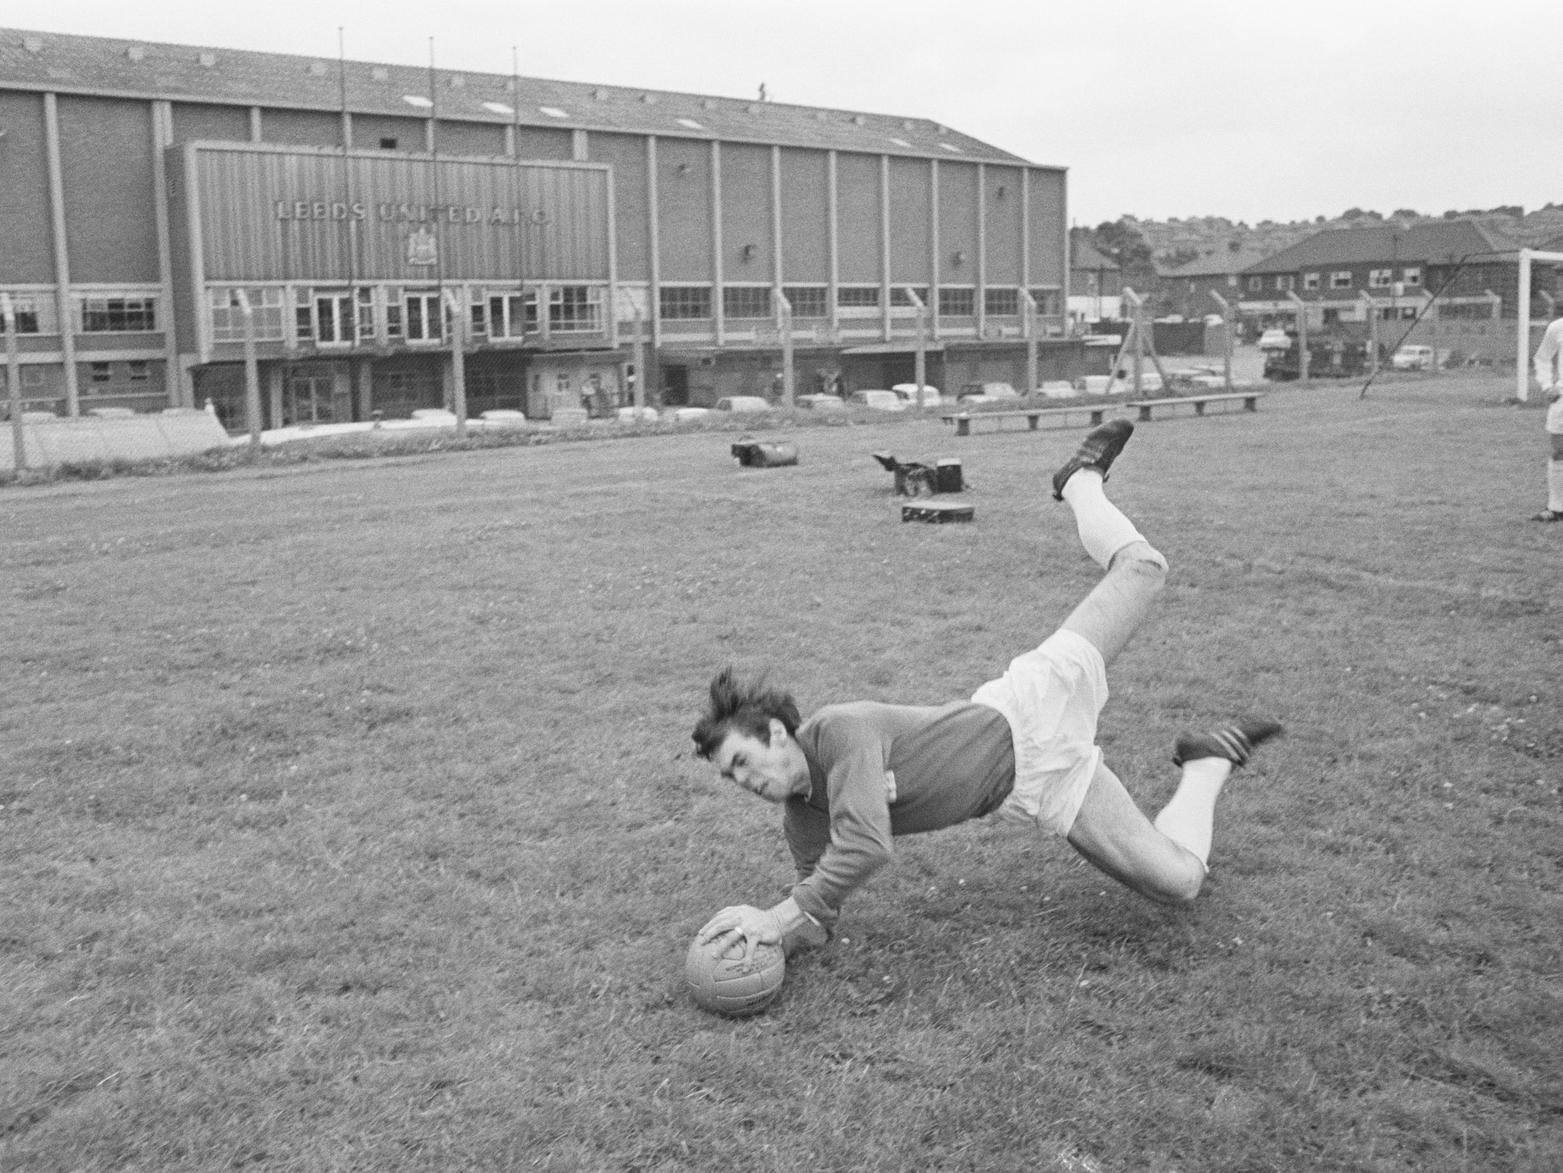 Goalkeeper David Harvey practices some shot-stopping outside of Elland Road during the 1960s.